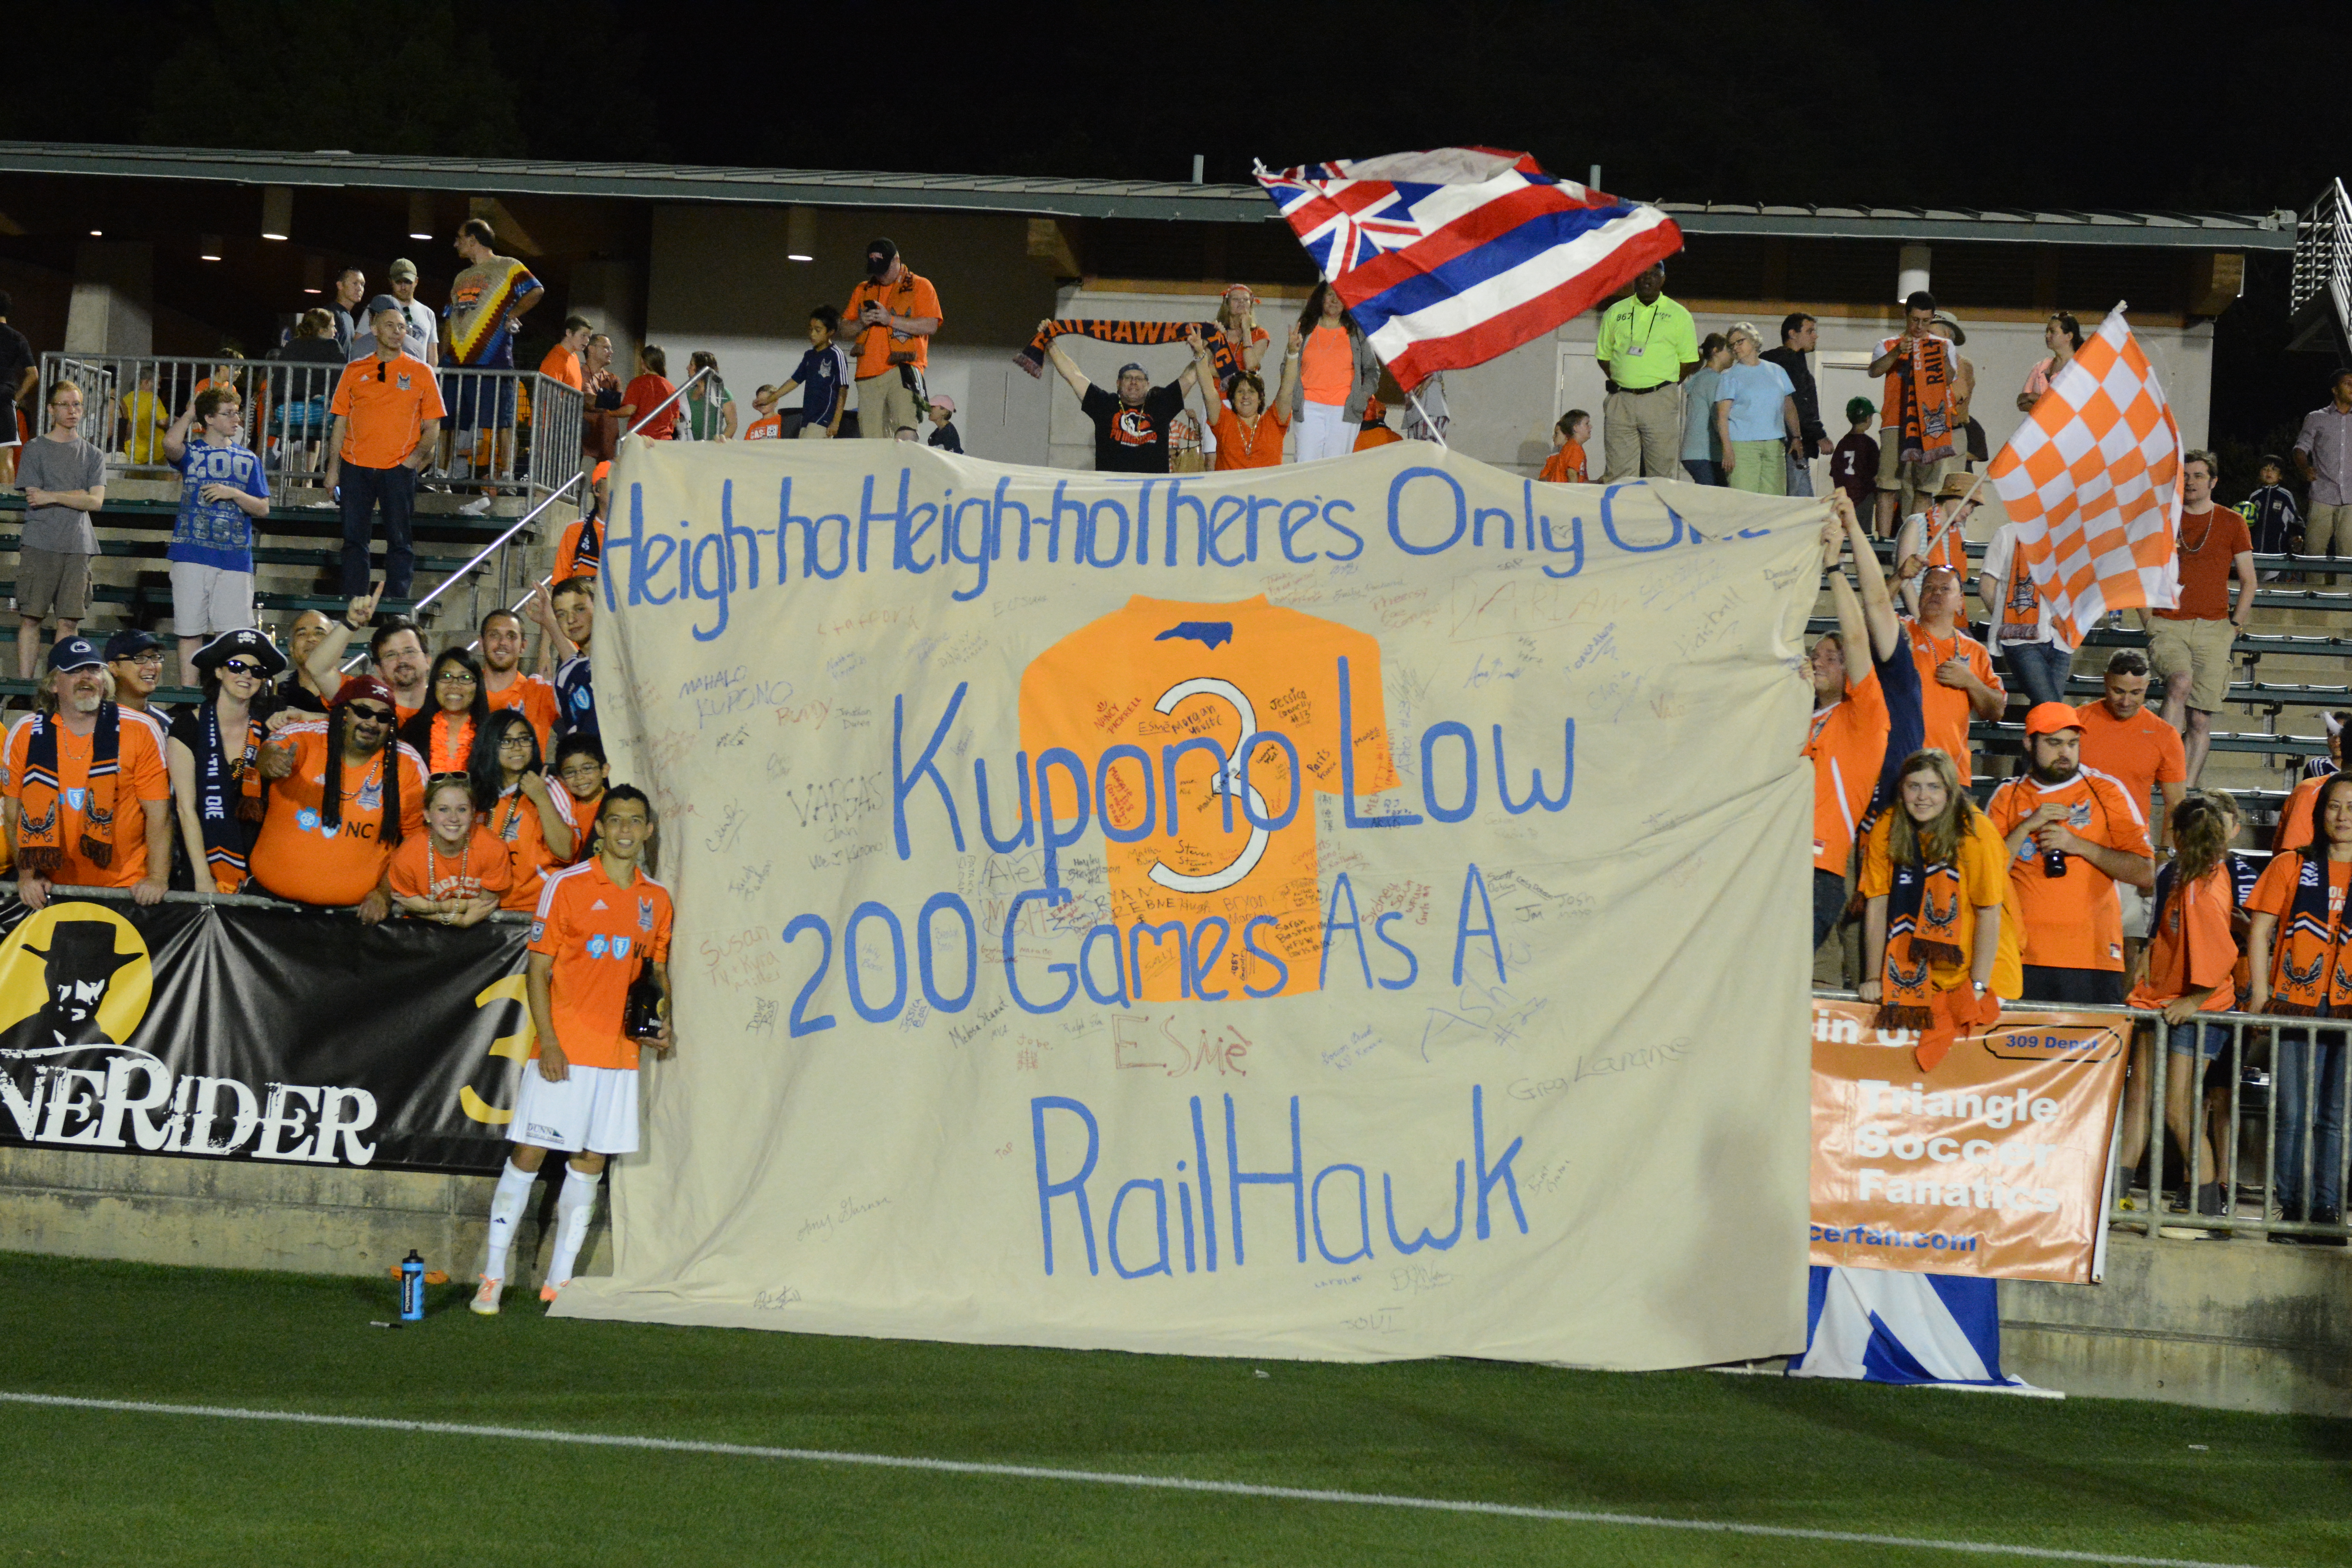 Carolina fans present Kupono Low with a banner celebrating his 200th game for the team (Photo: Carolina Railhawks)